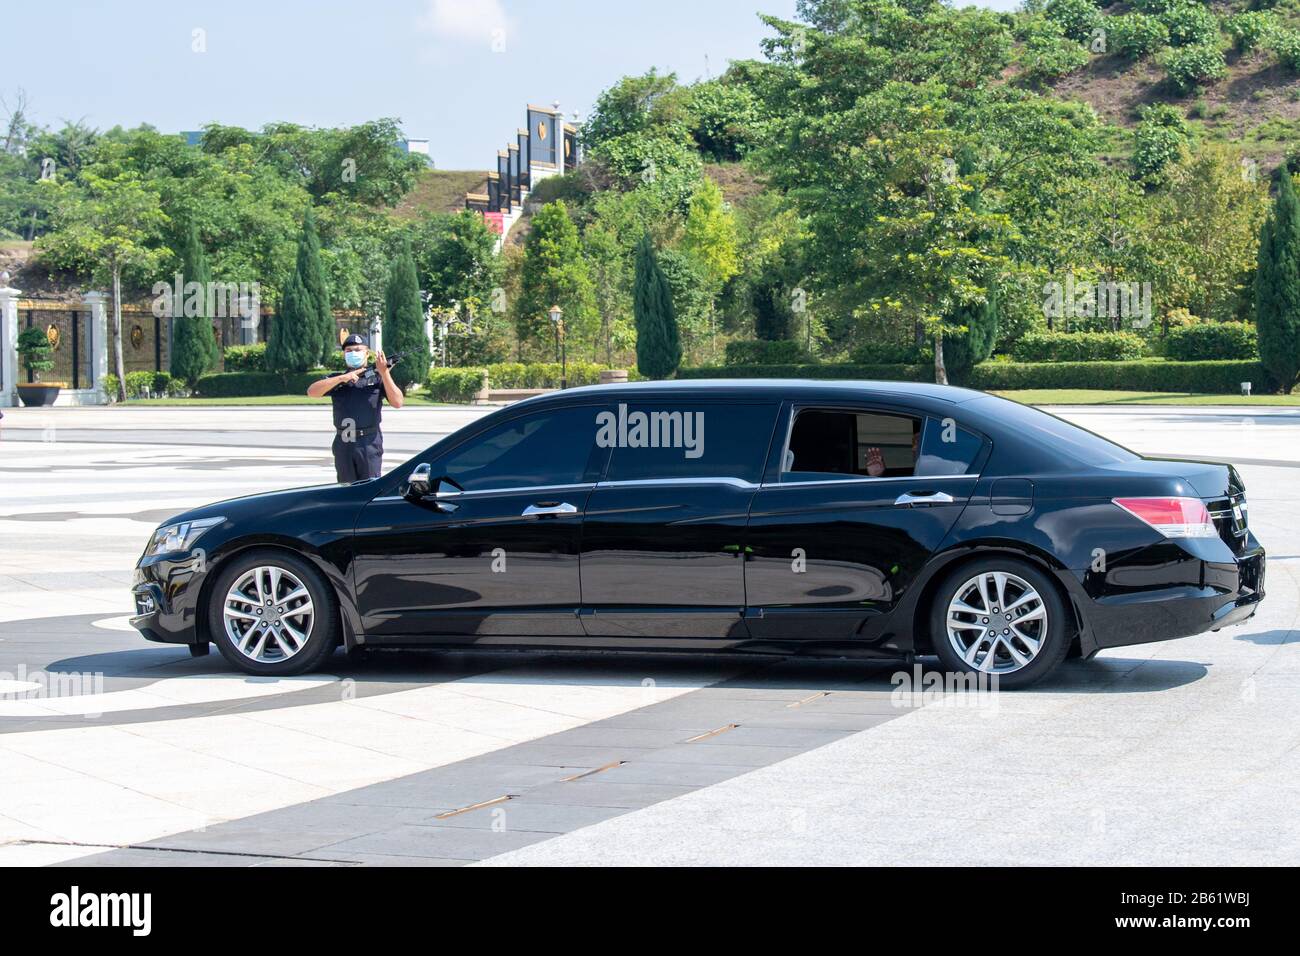 Kuala Lumpur Malaysia 9th Mar 2020 Malaysian Prime Minister Muhyiddin Yassin Arrives At The National Palace To Submit His New Cabinet Lineup To Malaysia S King Sultan Abdullah Sultan Ahmad Shah In Kuala